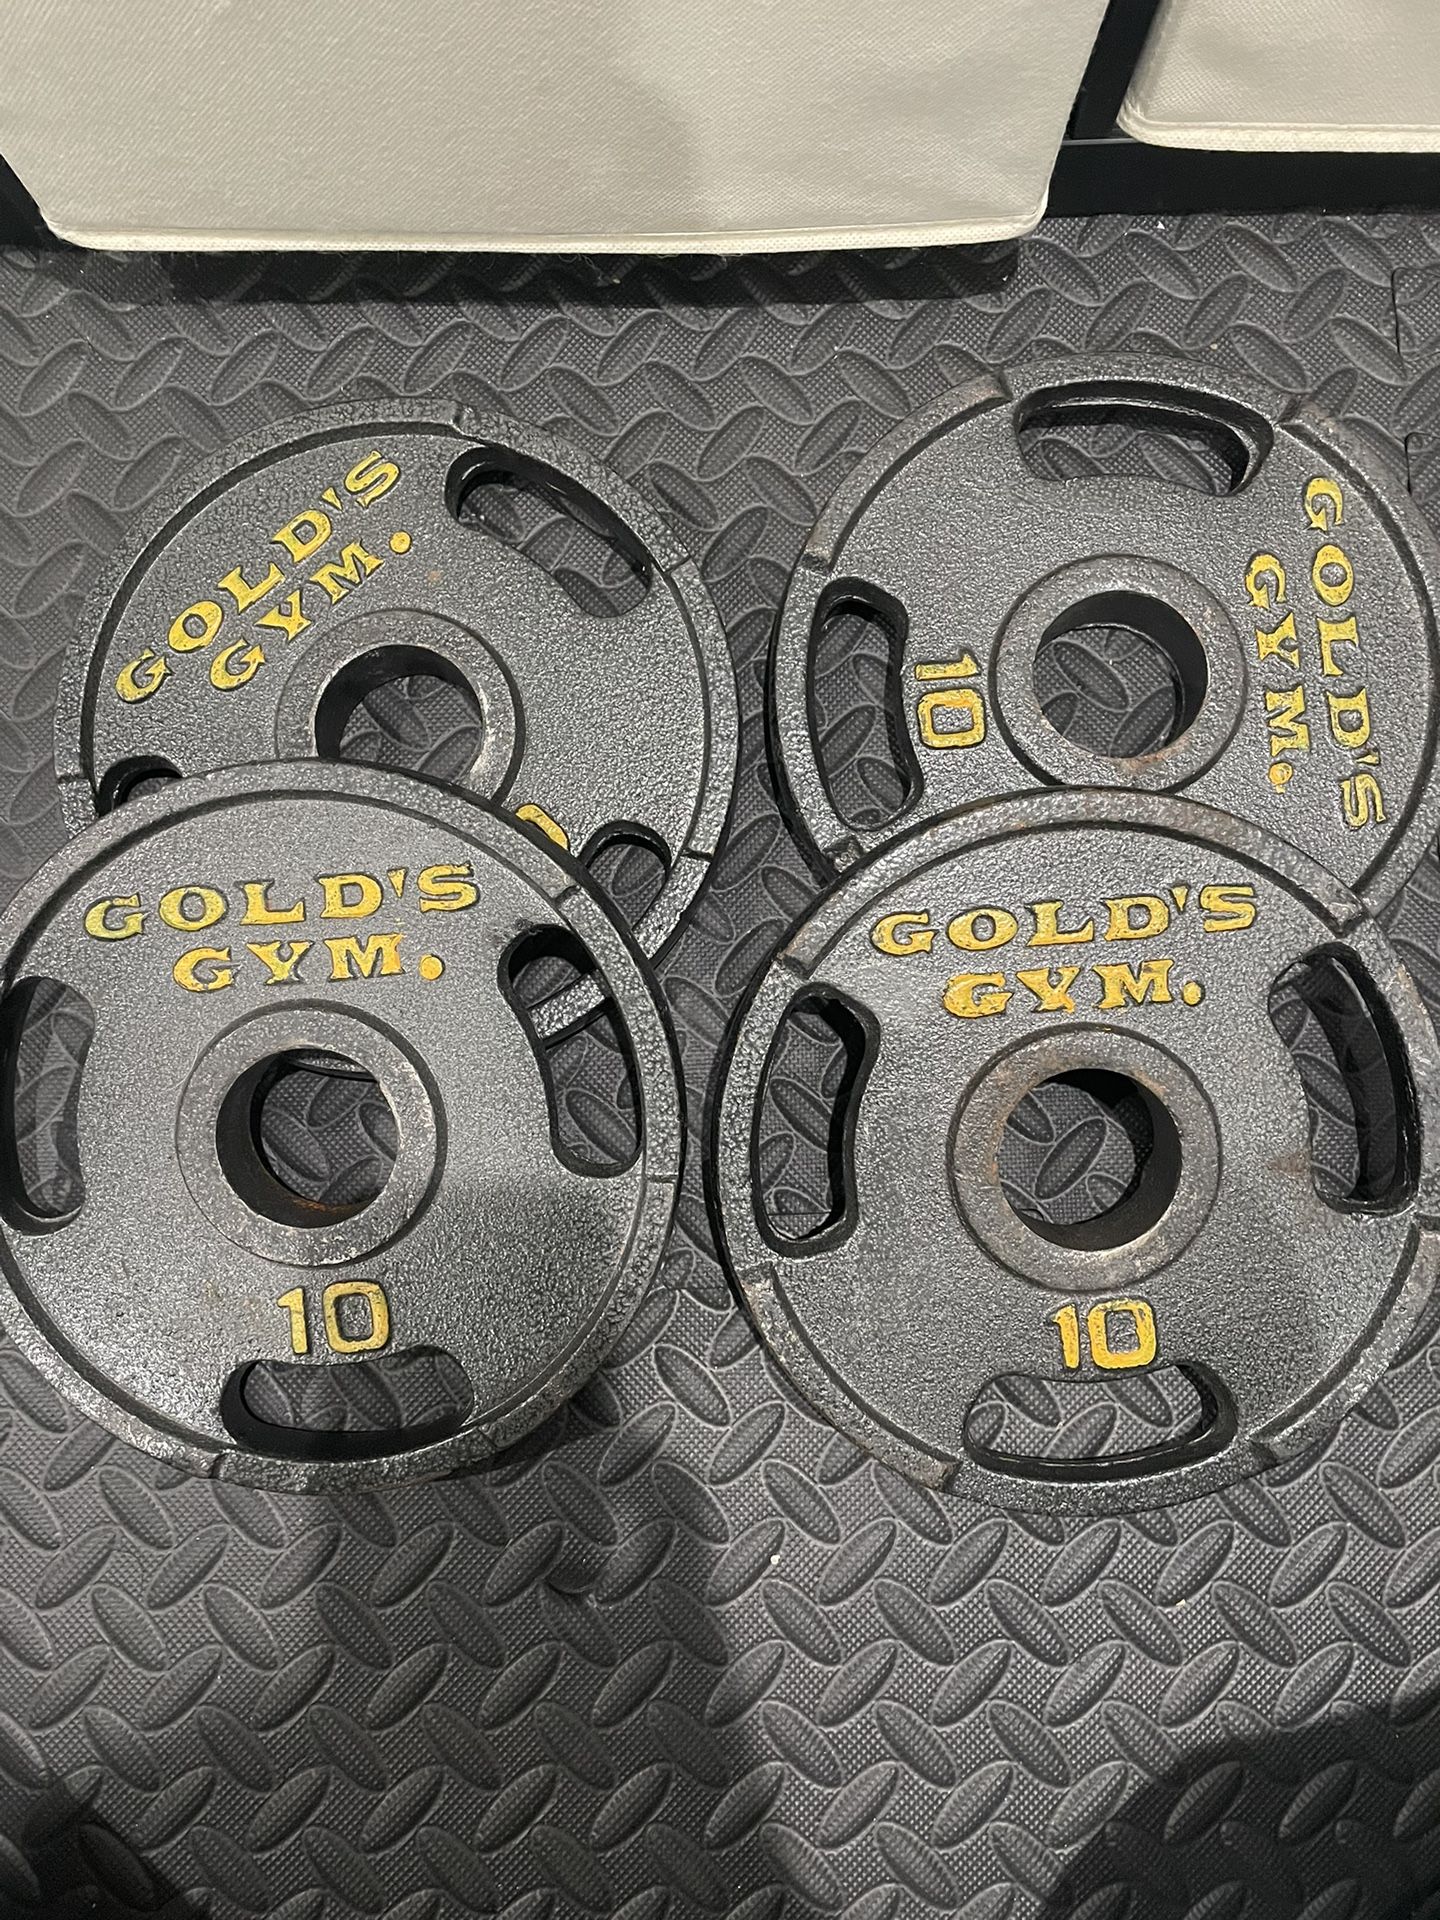 Golds Gym Weights